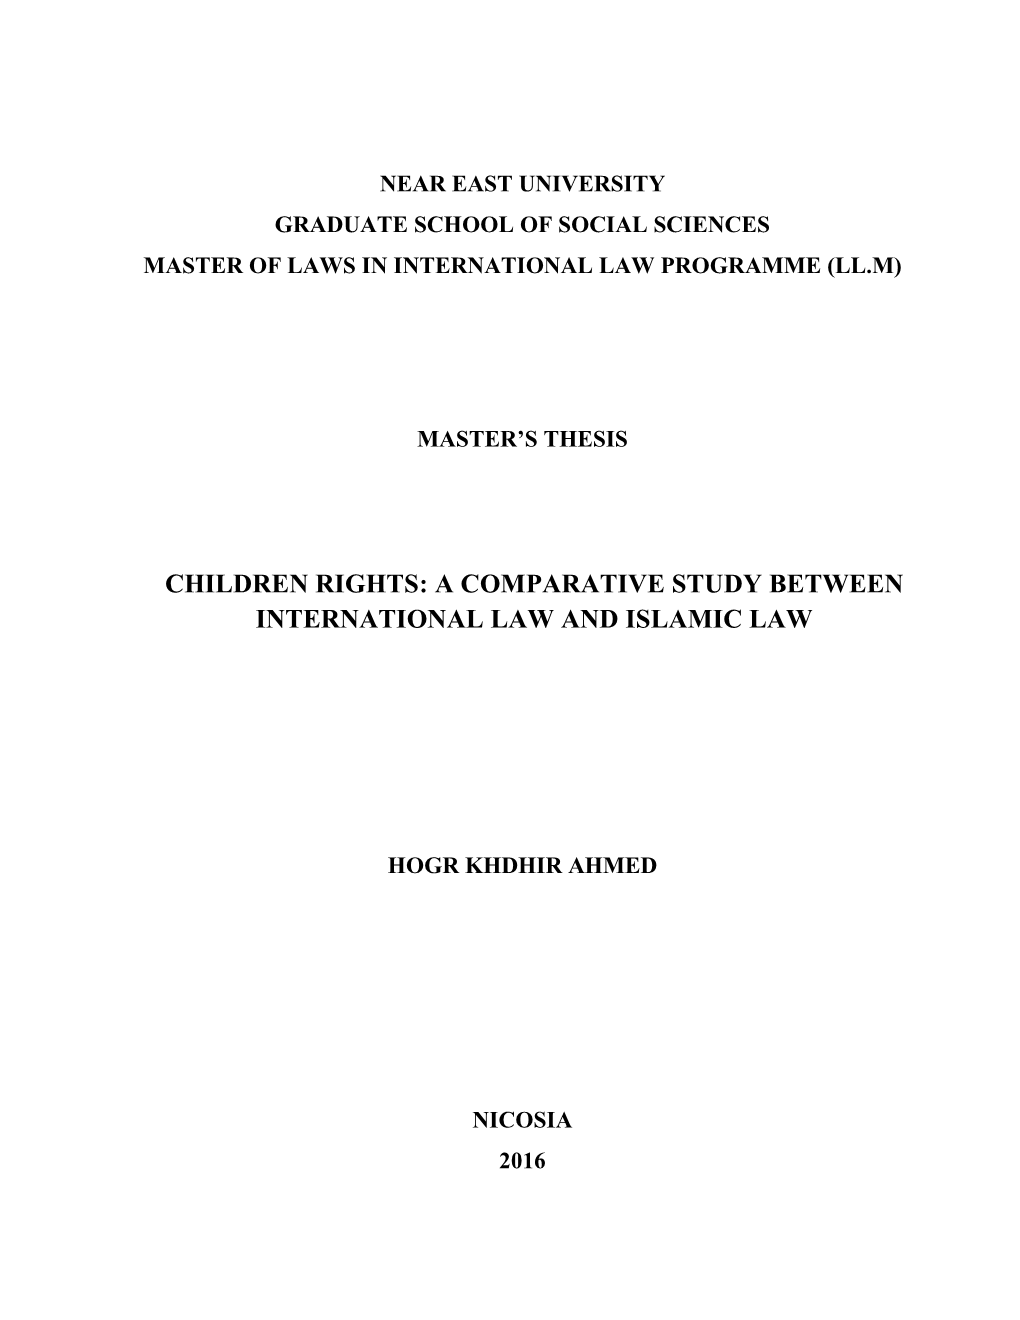 Children Rights: a Comparative Study Between International Law and Islamic Law